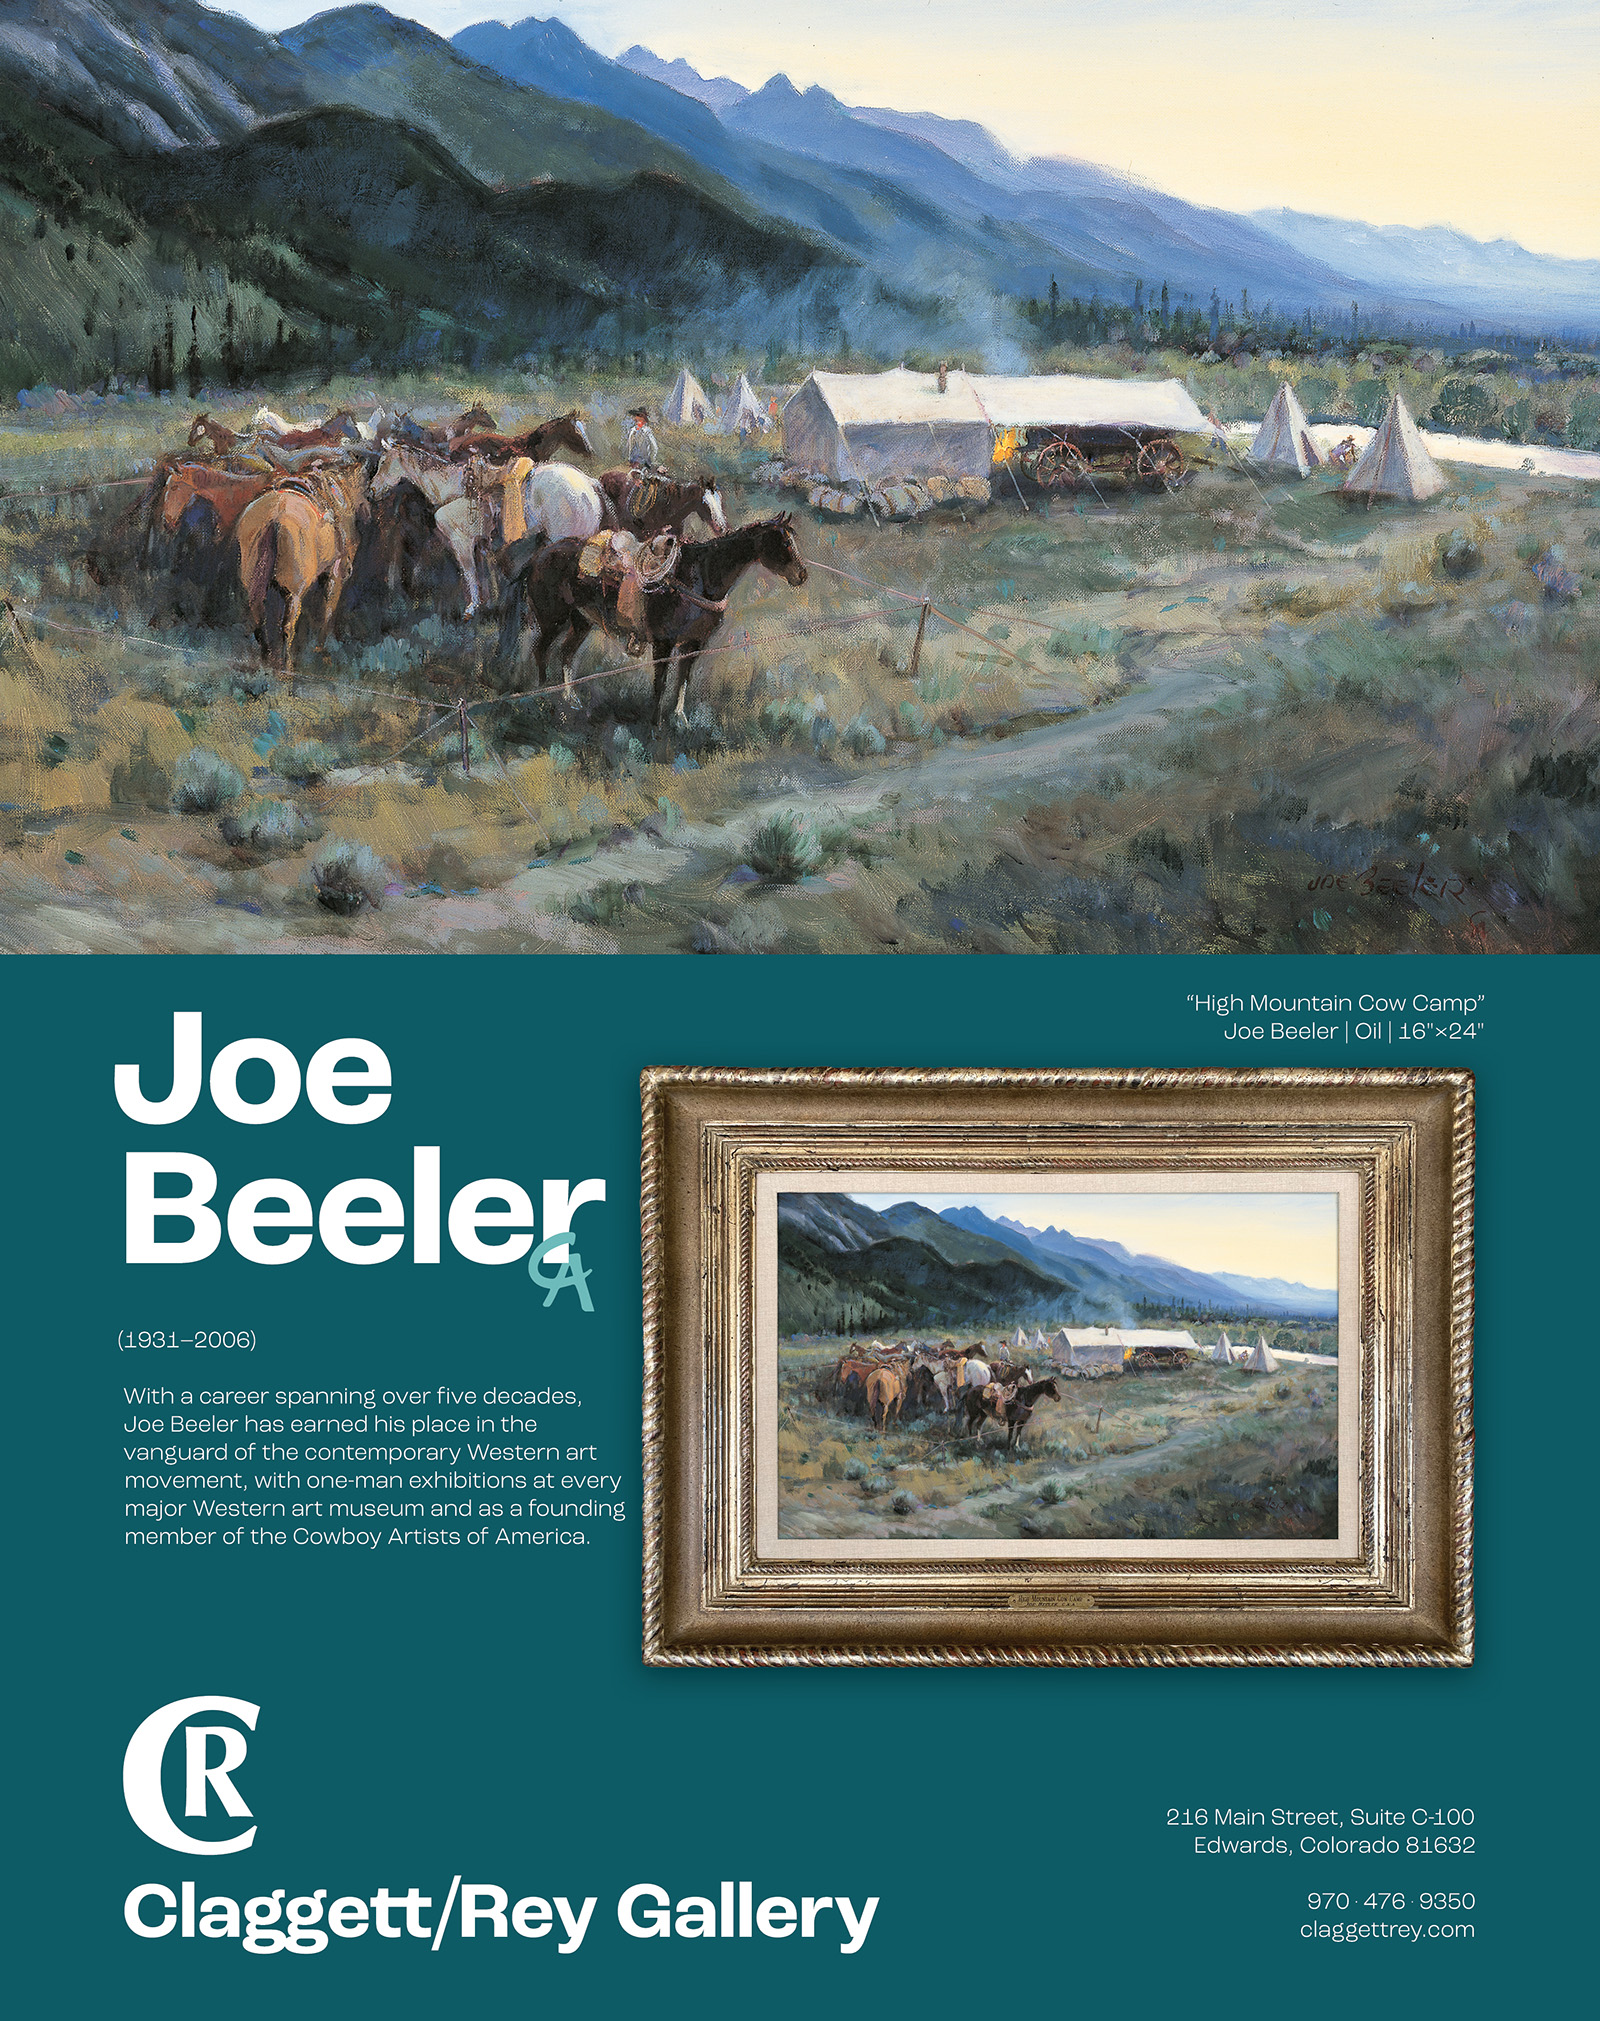 A special advertisment for a rare Joe Beeler piece that came into Claggett/Rey Gallery's stewardship through a client's estate